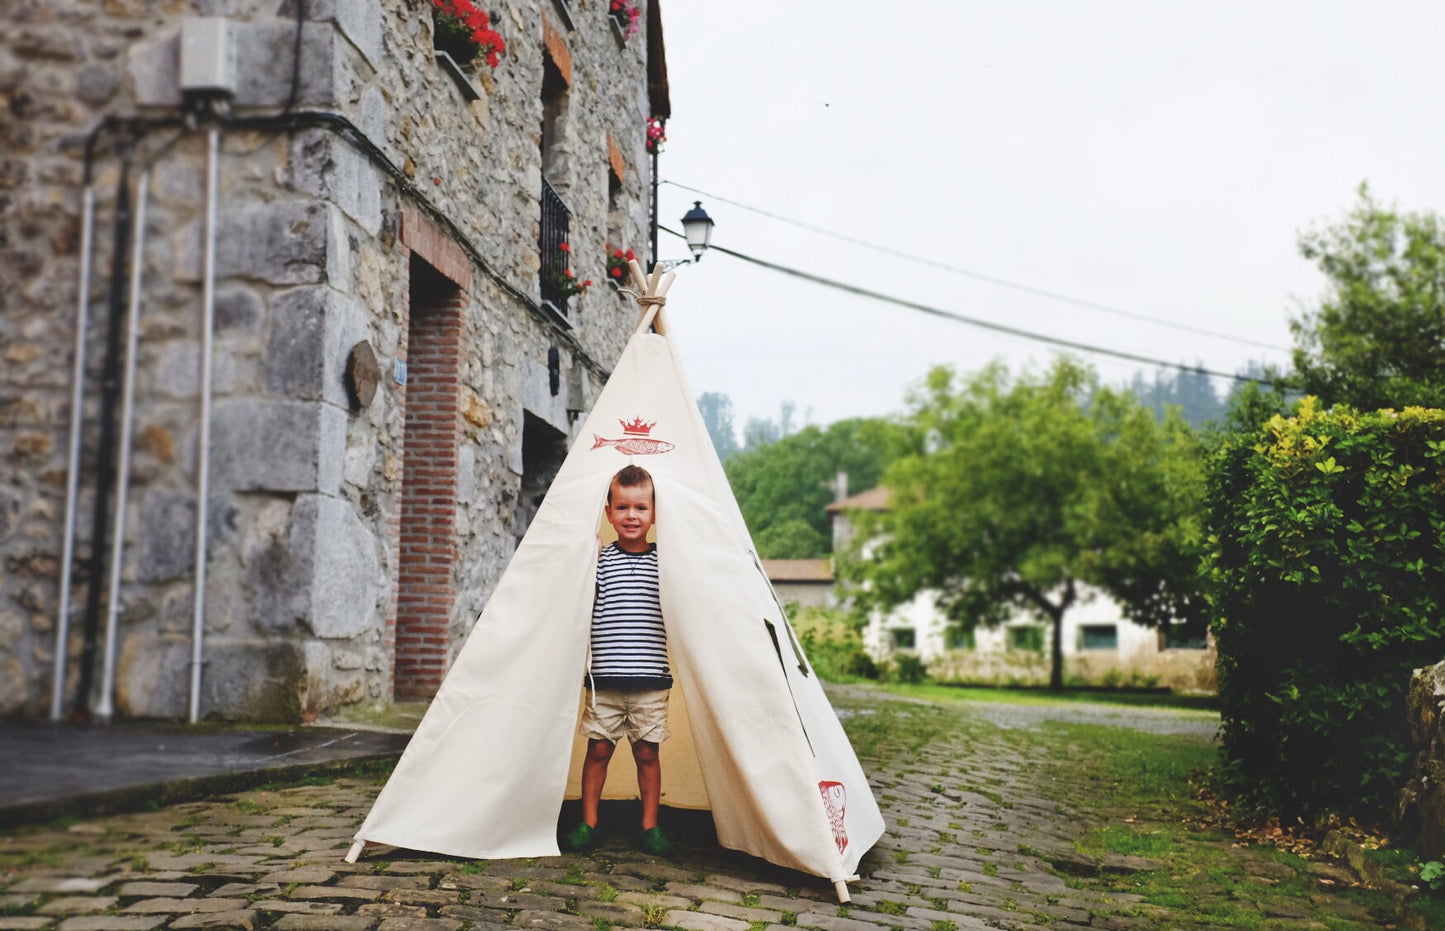 The Golden  Fish play Tent, teepee tent, teepee kids, kids play tent, kids tepee play tent, baby boy, baby girl, gift for boy, kids decor